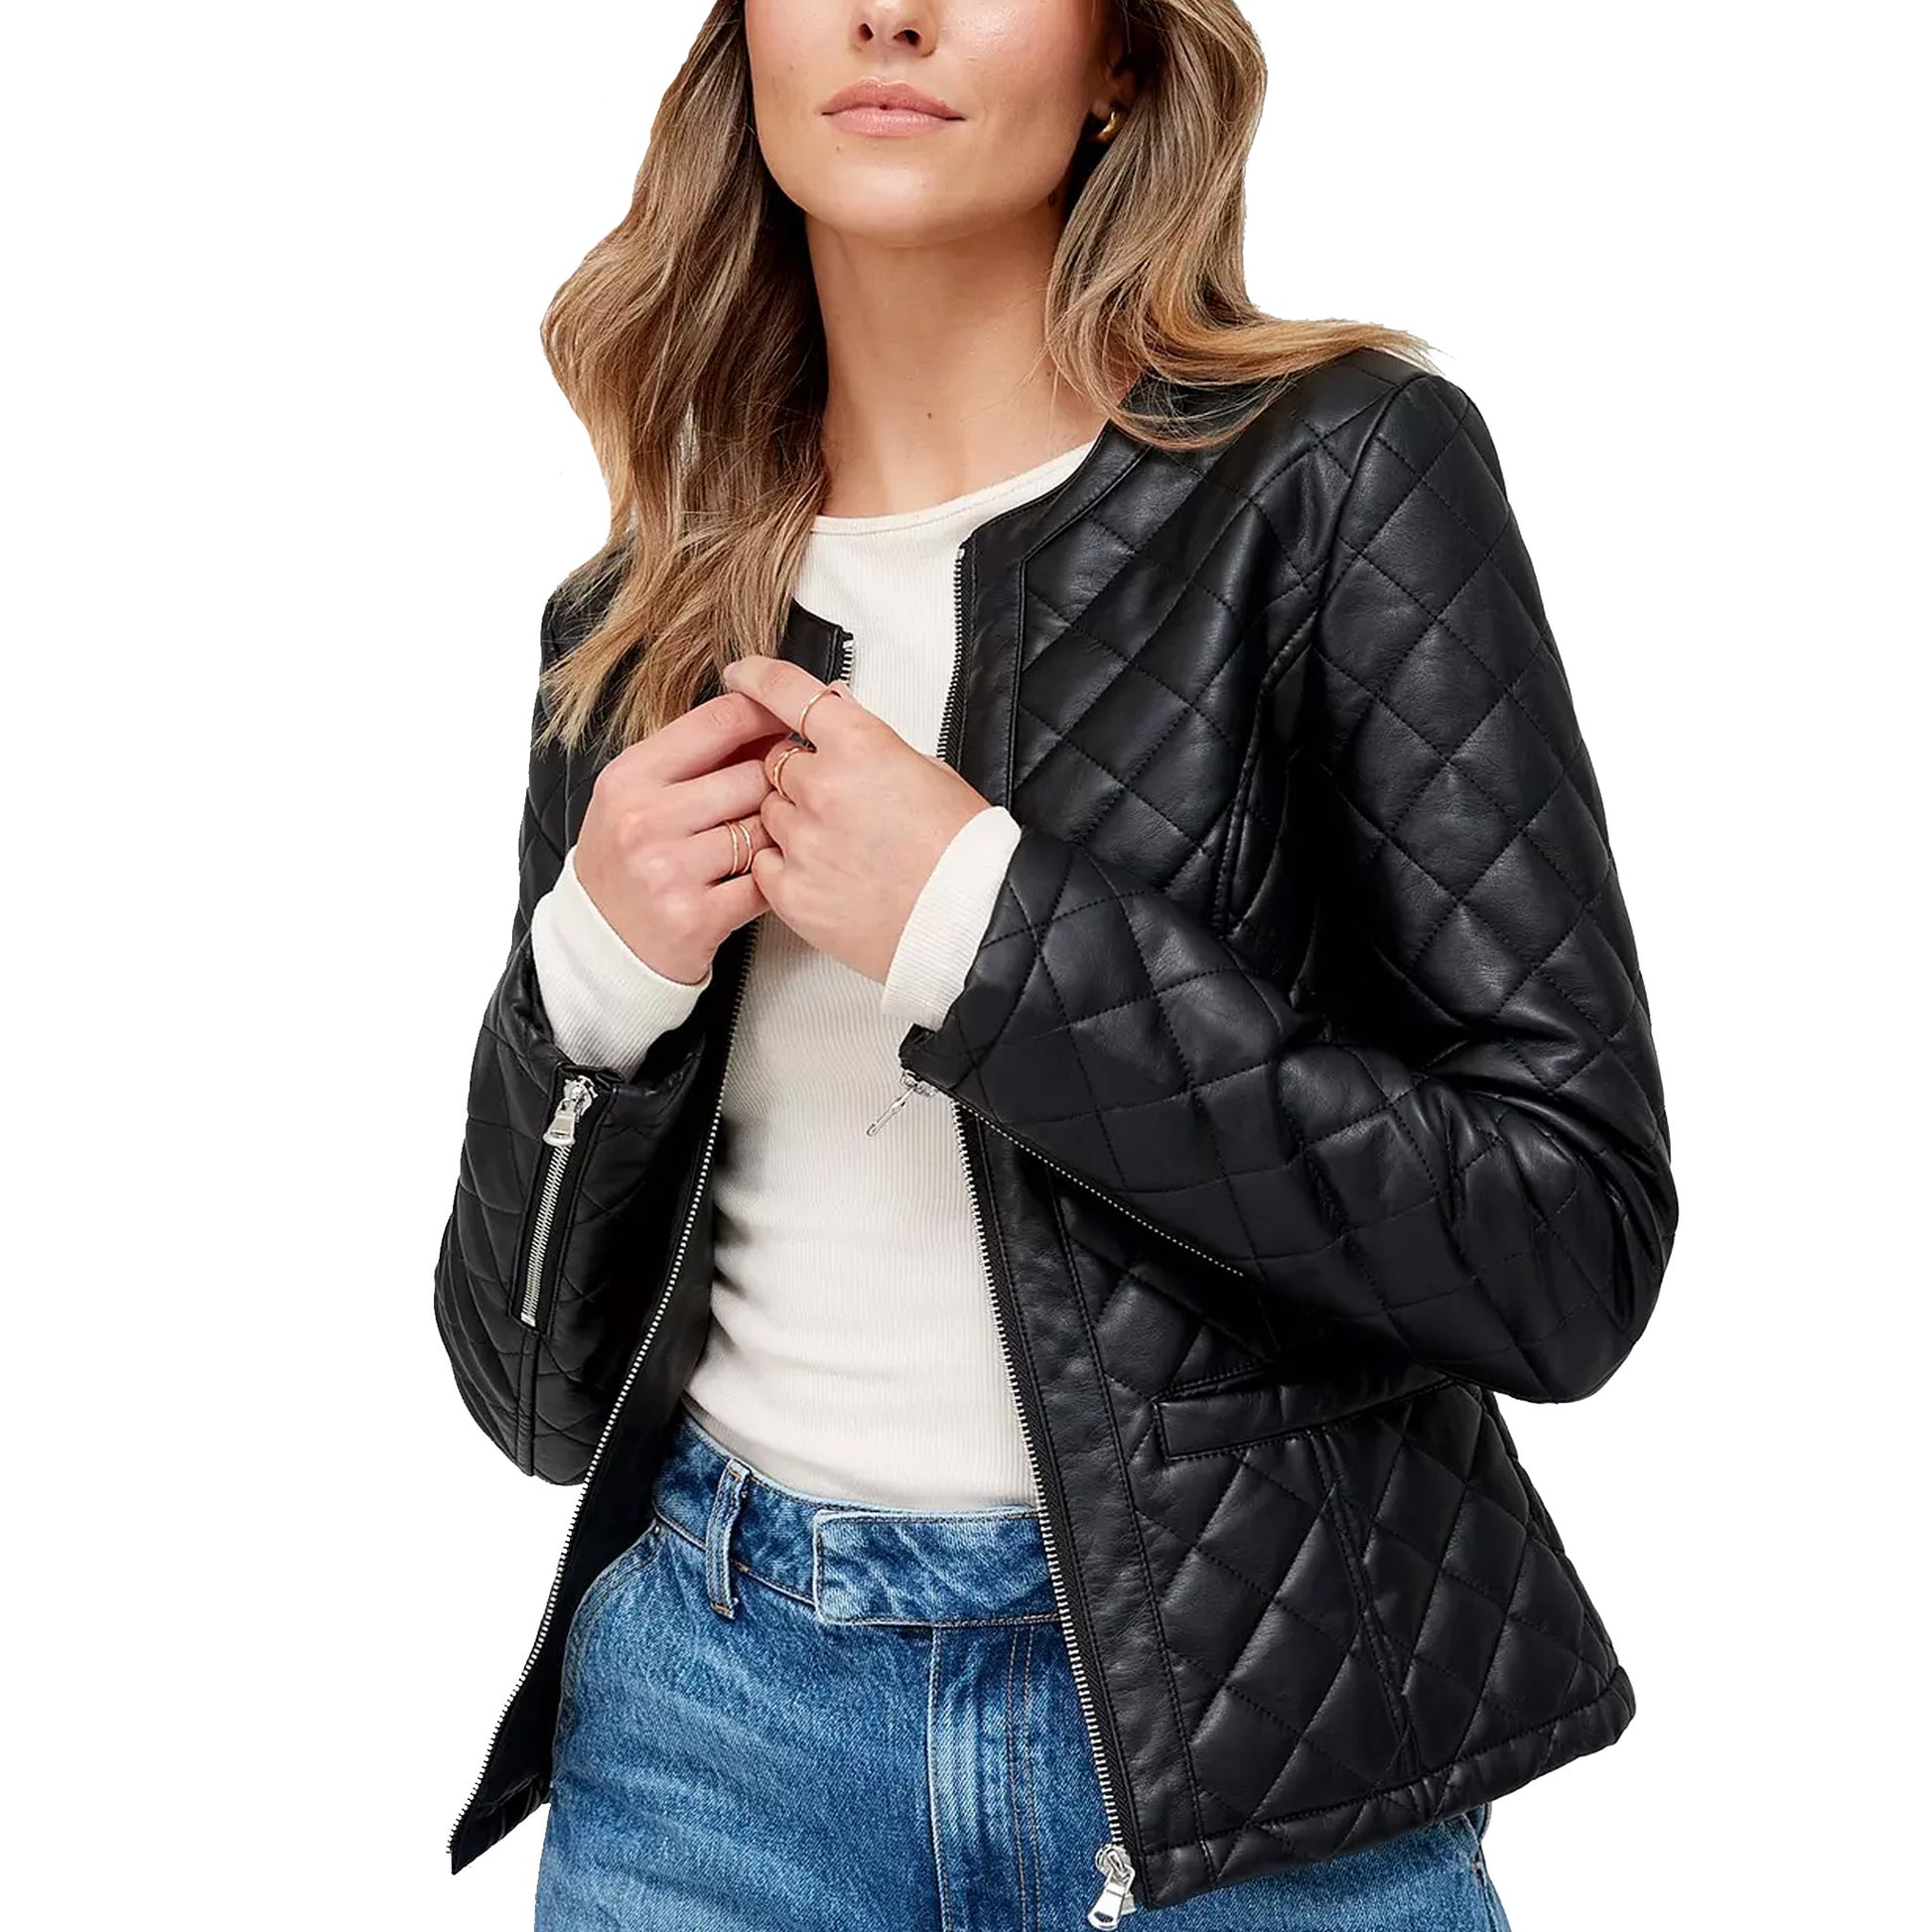 Quilted Style Black Women Leather Jacket - ShopSplenor